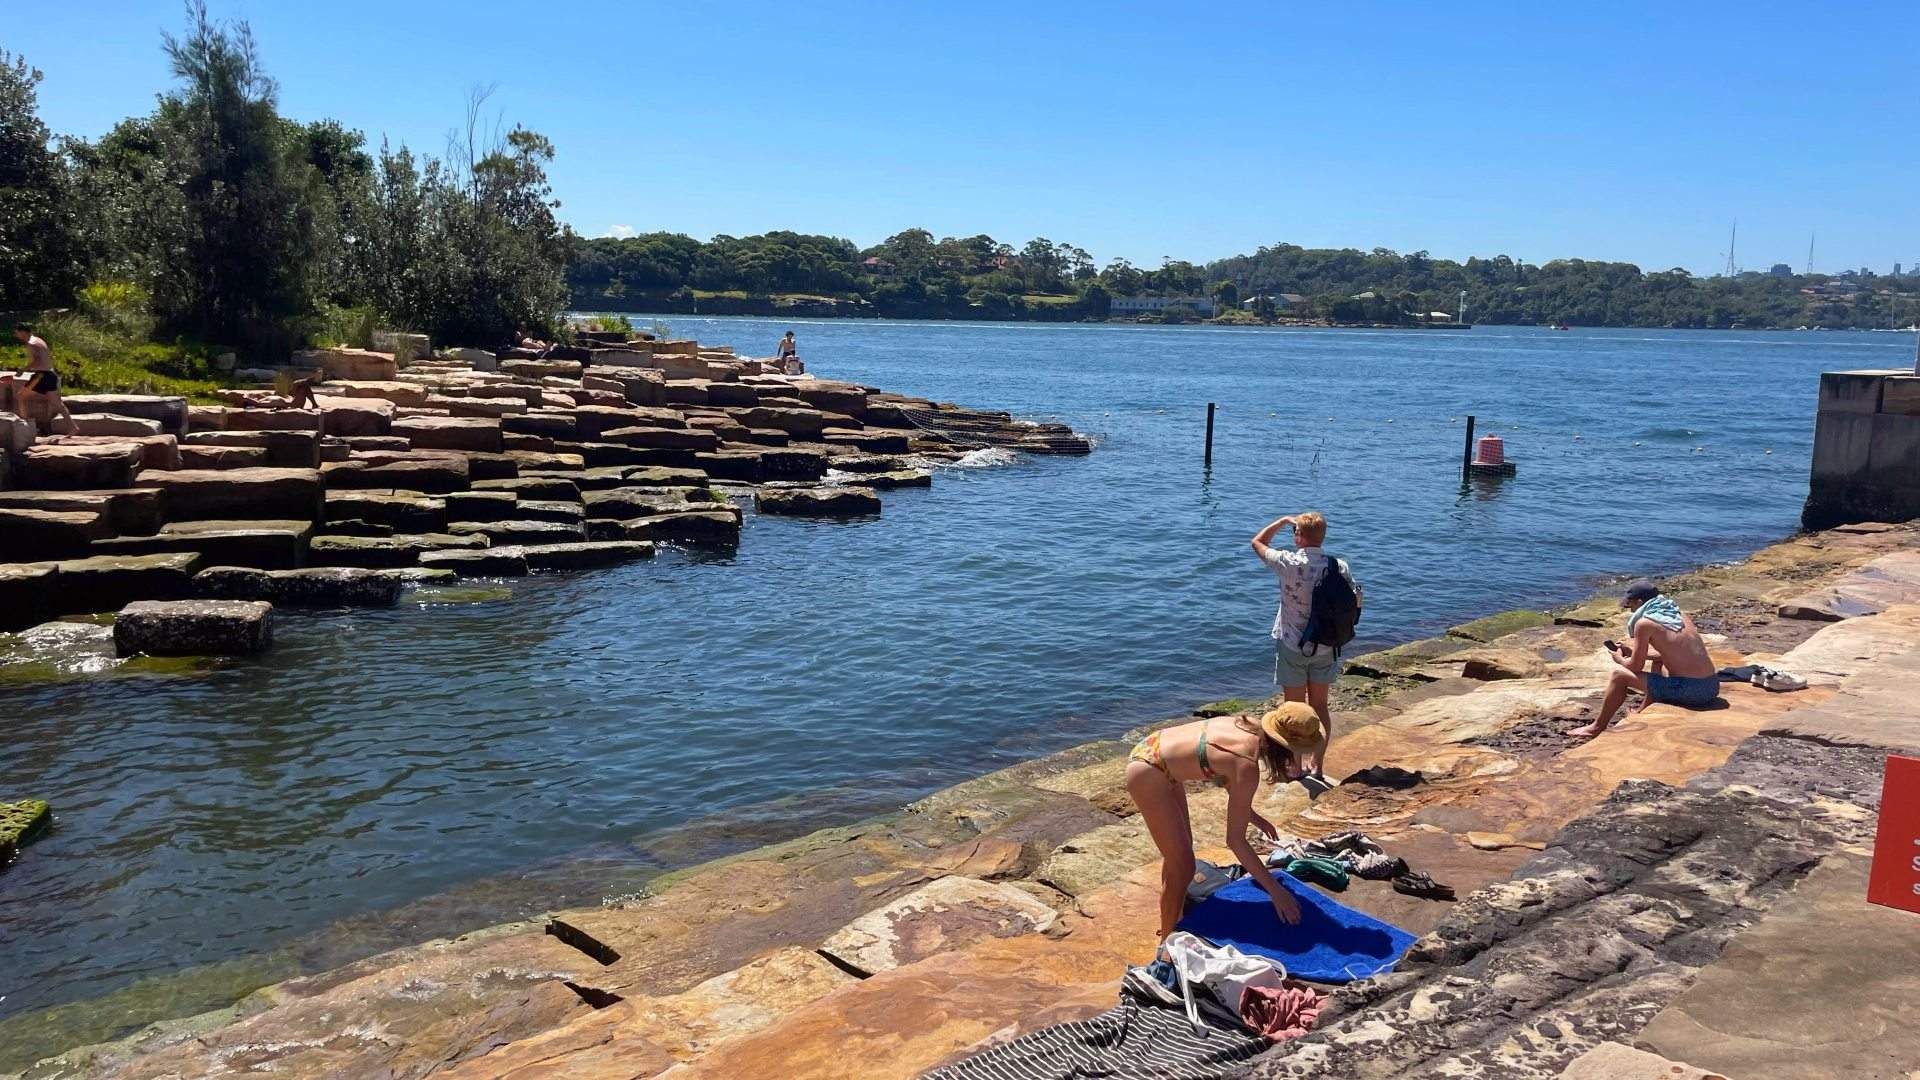 You Can Now Take a Dip in Sydney Harbour with Swimming Returning to Barangaroo Reserve's Marrinawi Cove